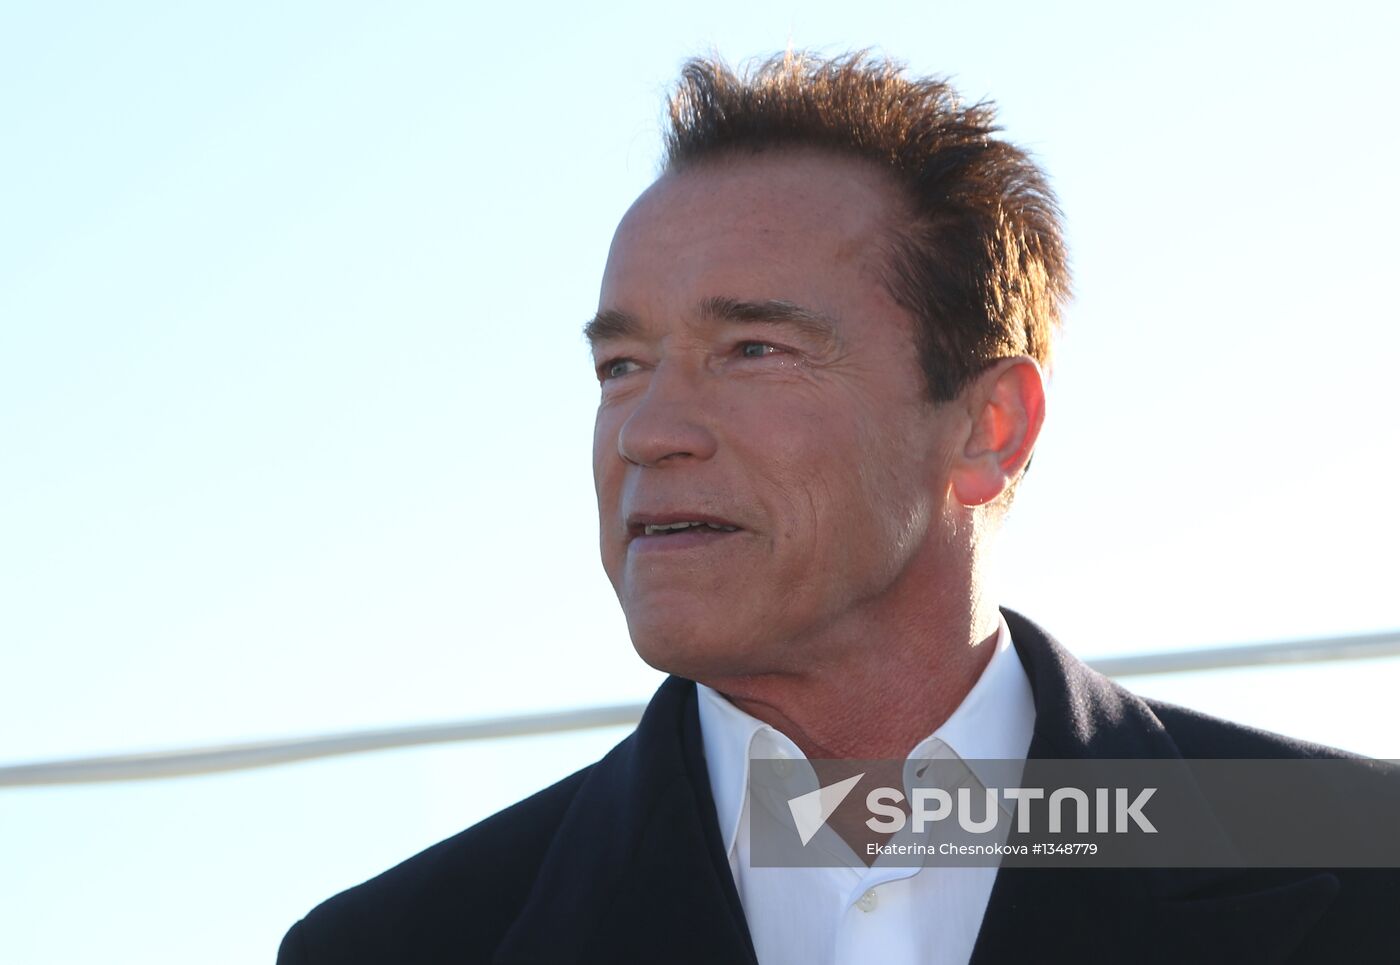 Arnold Schwarzenegger and Johnny Knoxville at photocall